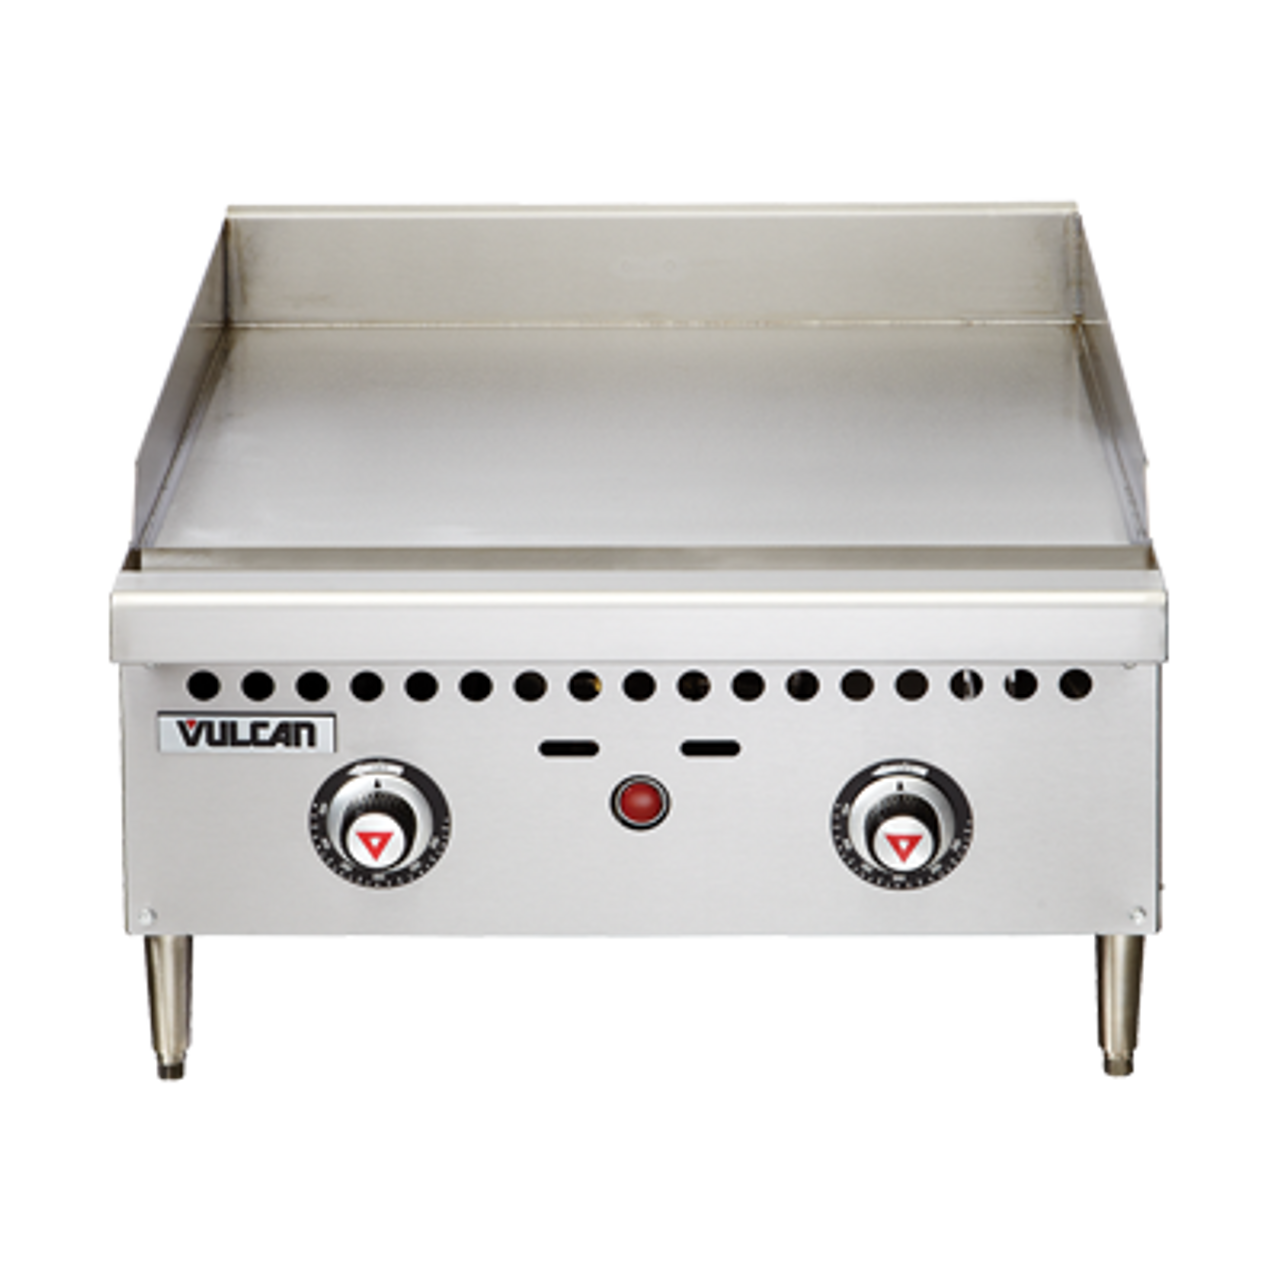 Griddle, countertop, gas, 48" W x 20-1/2" D cooking surface, 1" thick polished steel griddle plate, (4) burners, fully welded, manual control valve every 12", low profile, 4-1/2" grease can capacity, (1) burner, stainless steel front, sides & front top ledge, 4" adjustable legs, 100,000 BTU, CSA, NSF